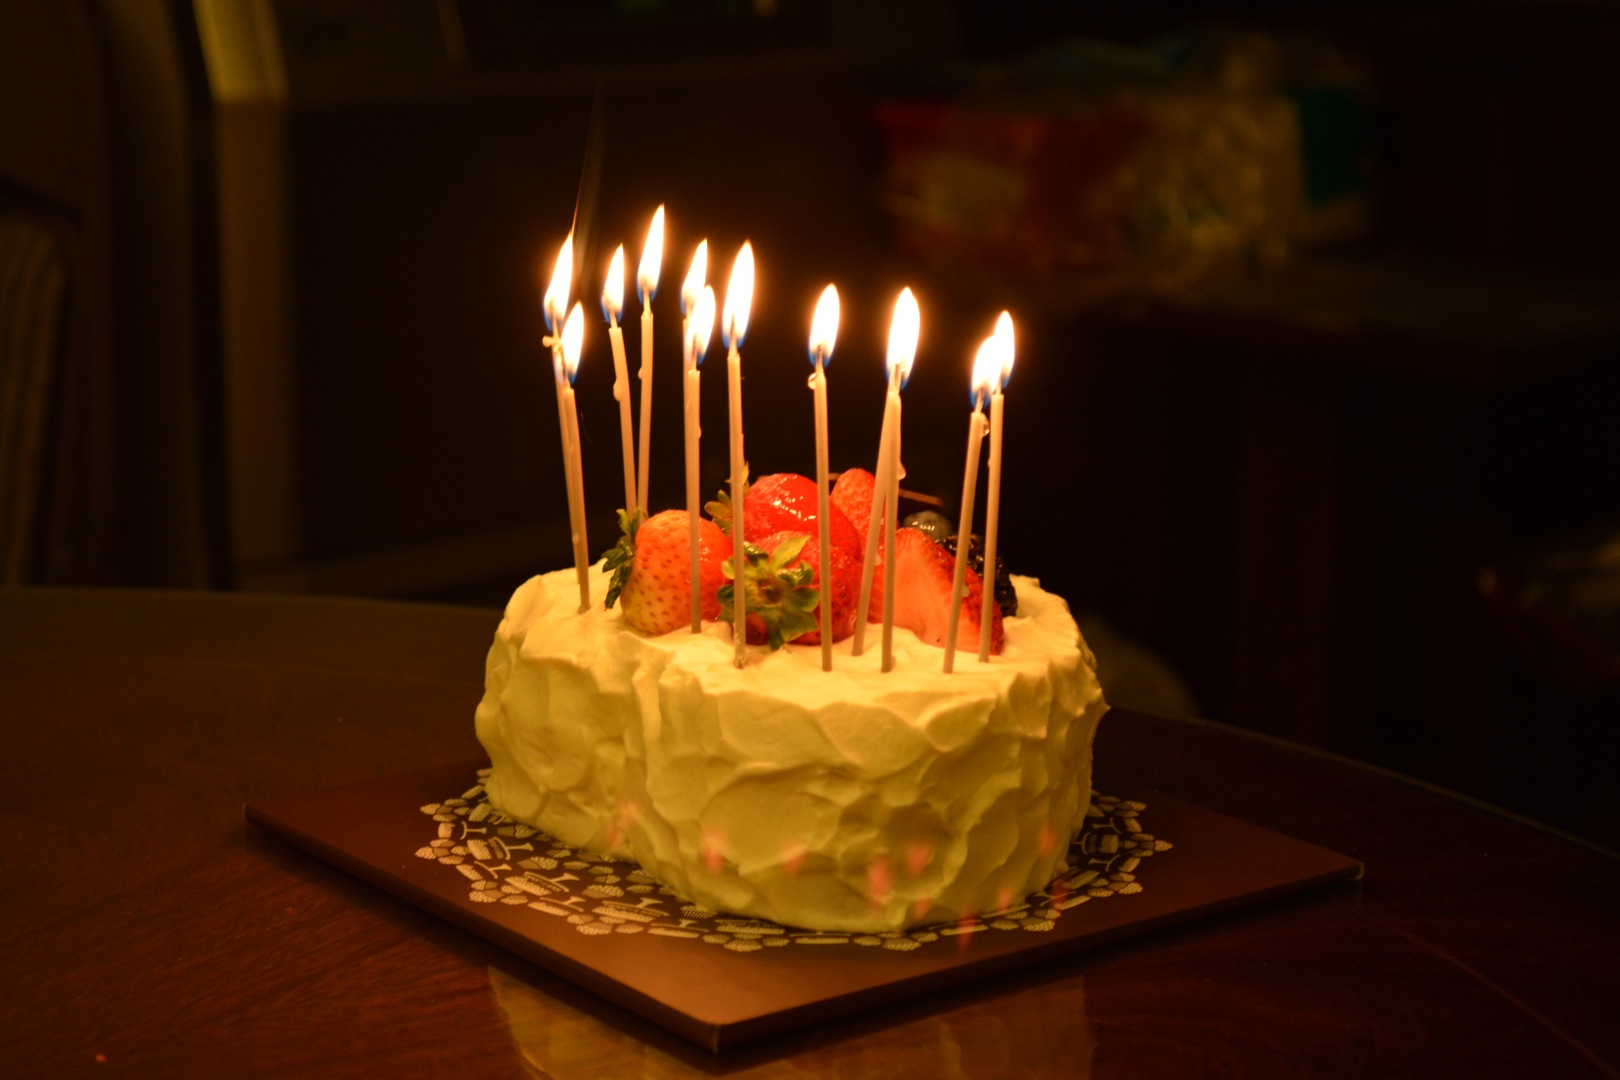 pic of birthday cake with candles